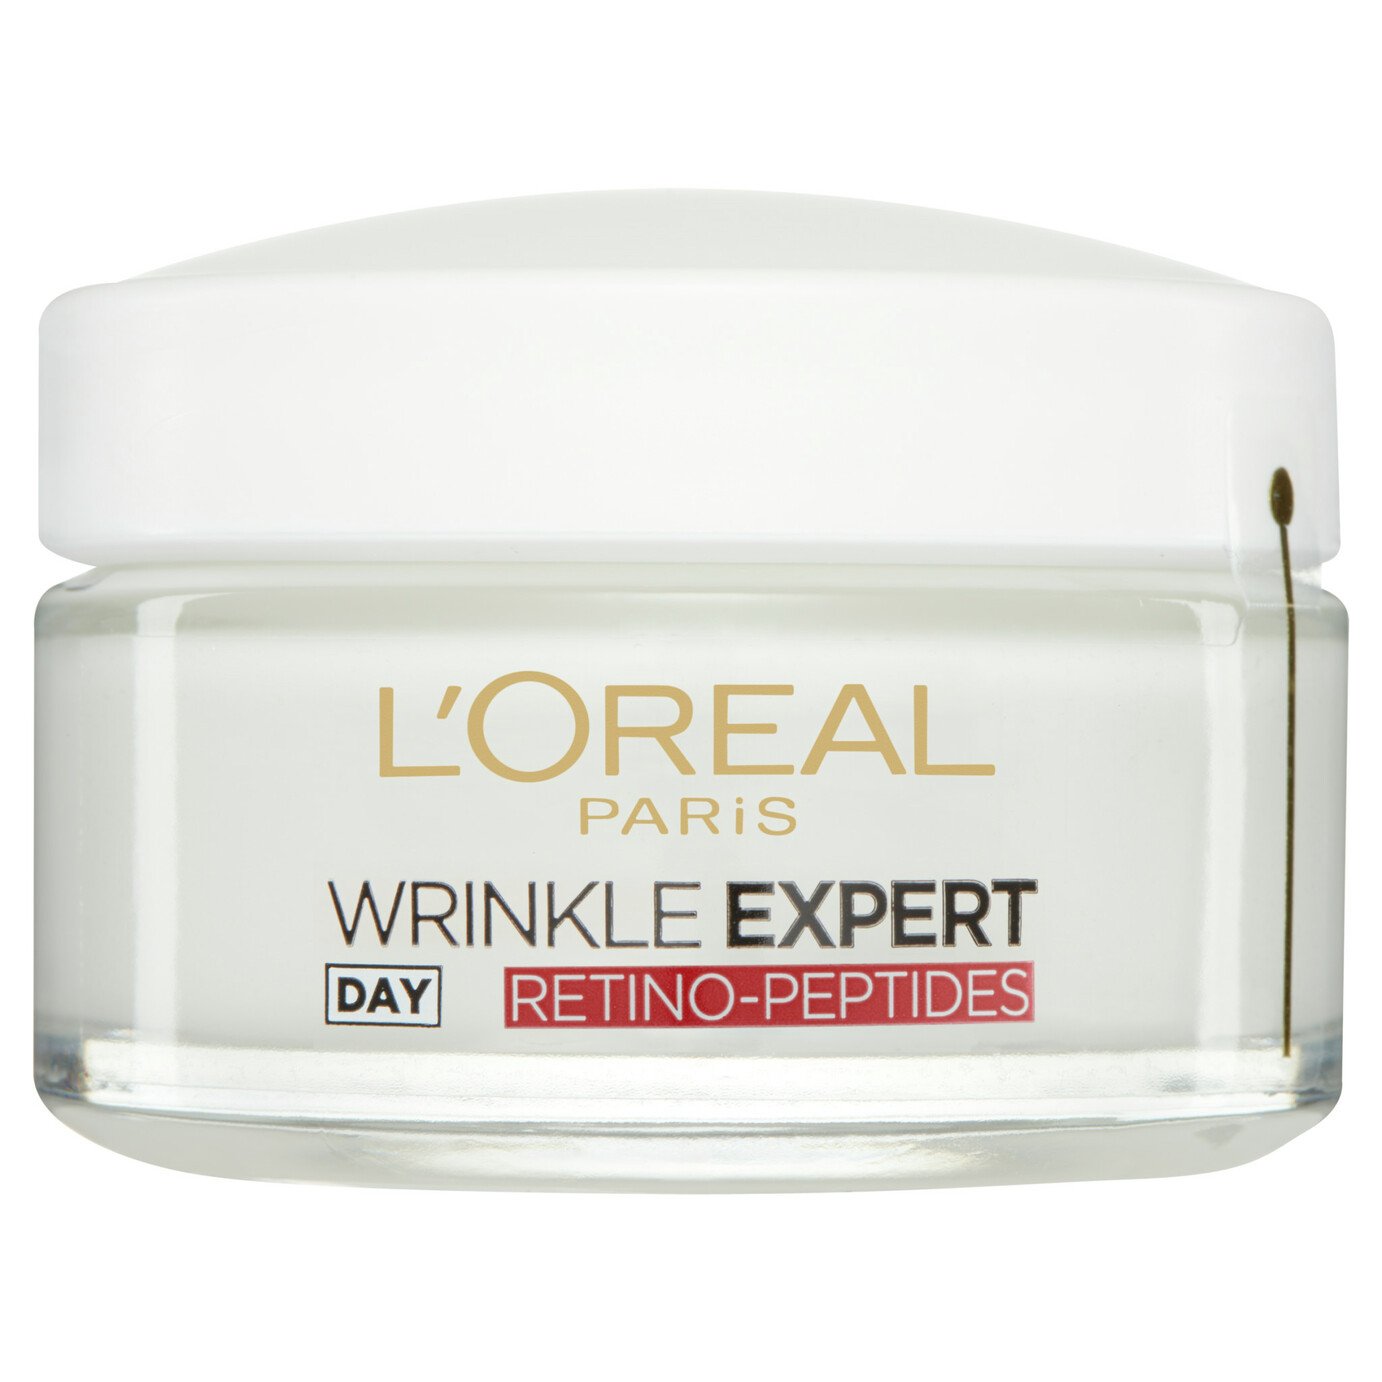 L'Oreal De Wrinkle Expert 45+ day Cream Review